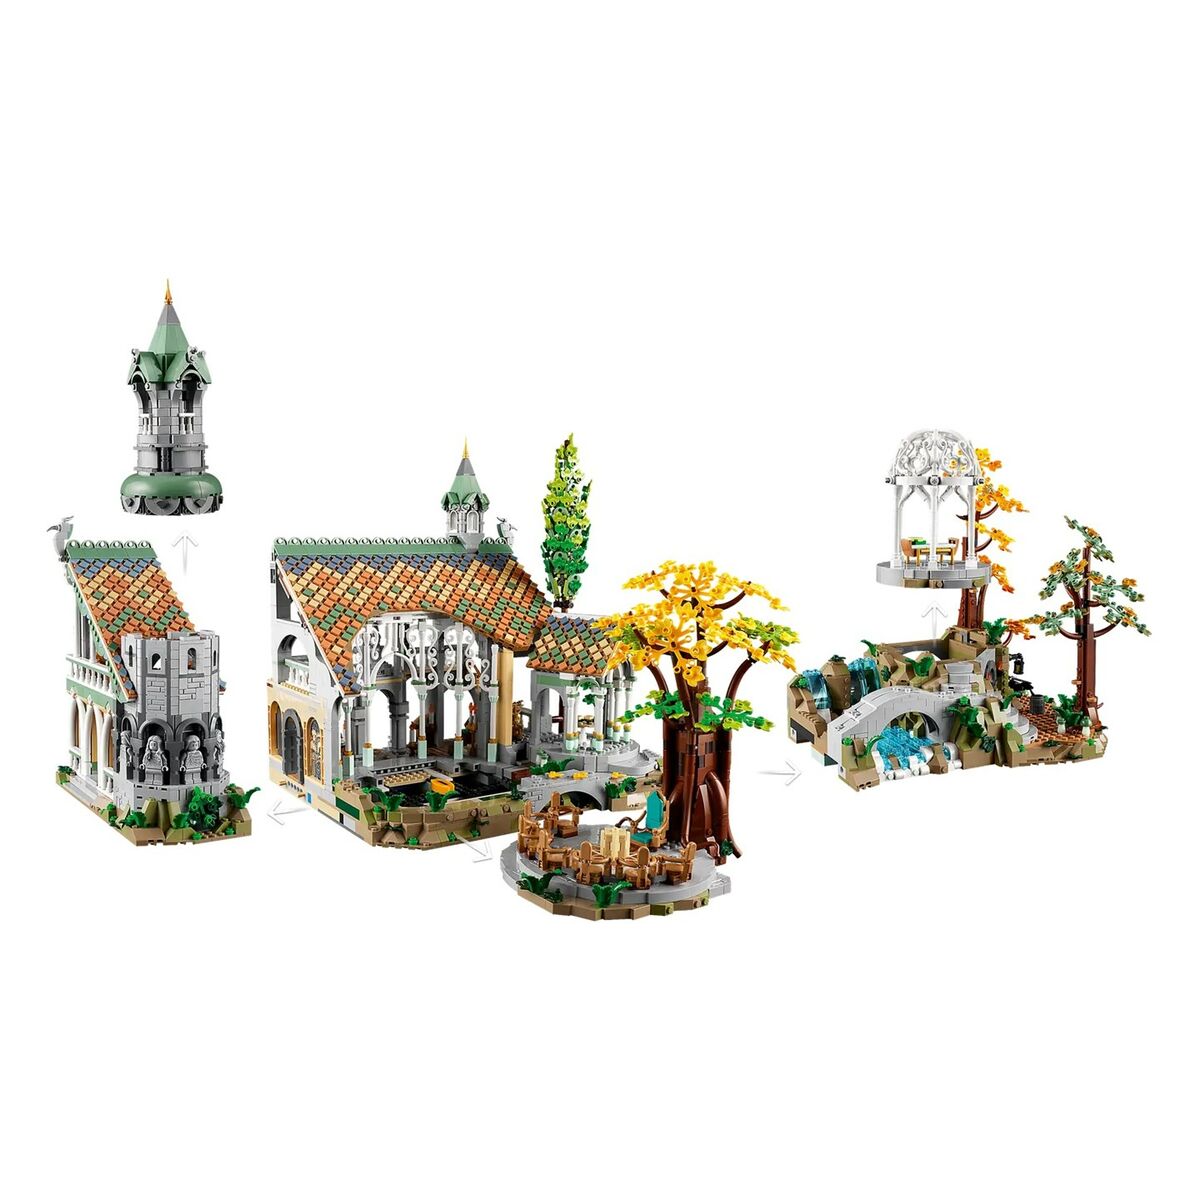 Playset Lego The Lord Of The Rings: Rivendell 10316 6167 Pezzi 72 X 39 X 50 cm